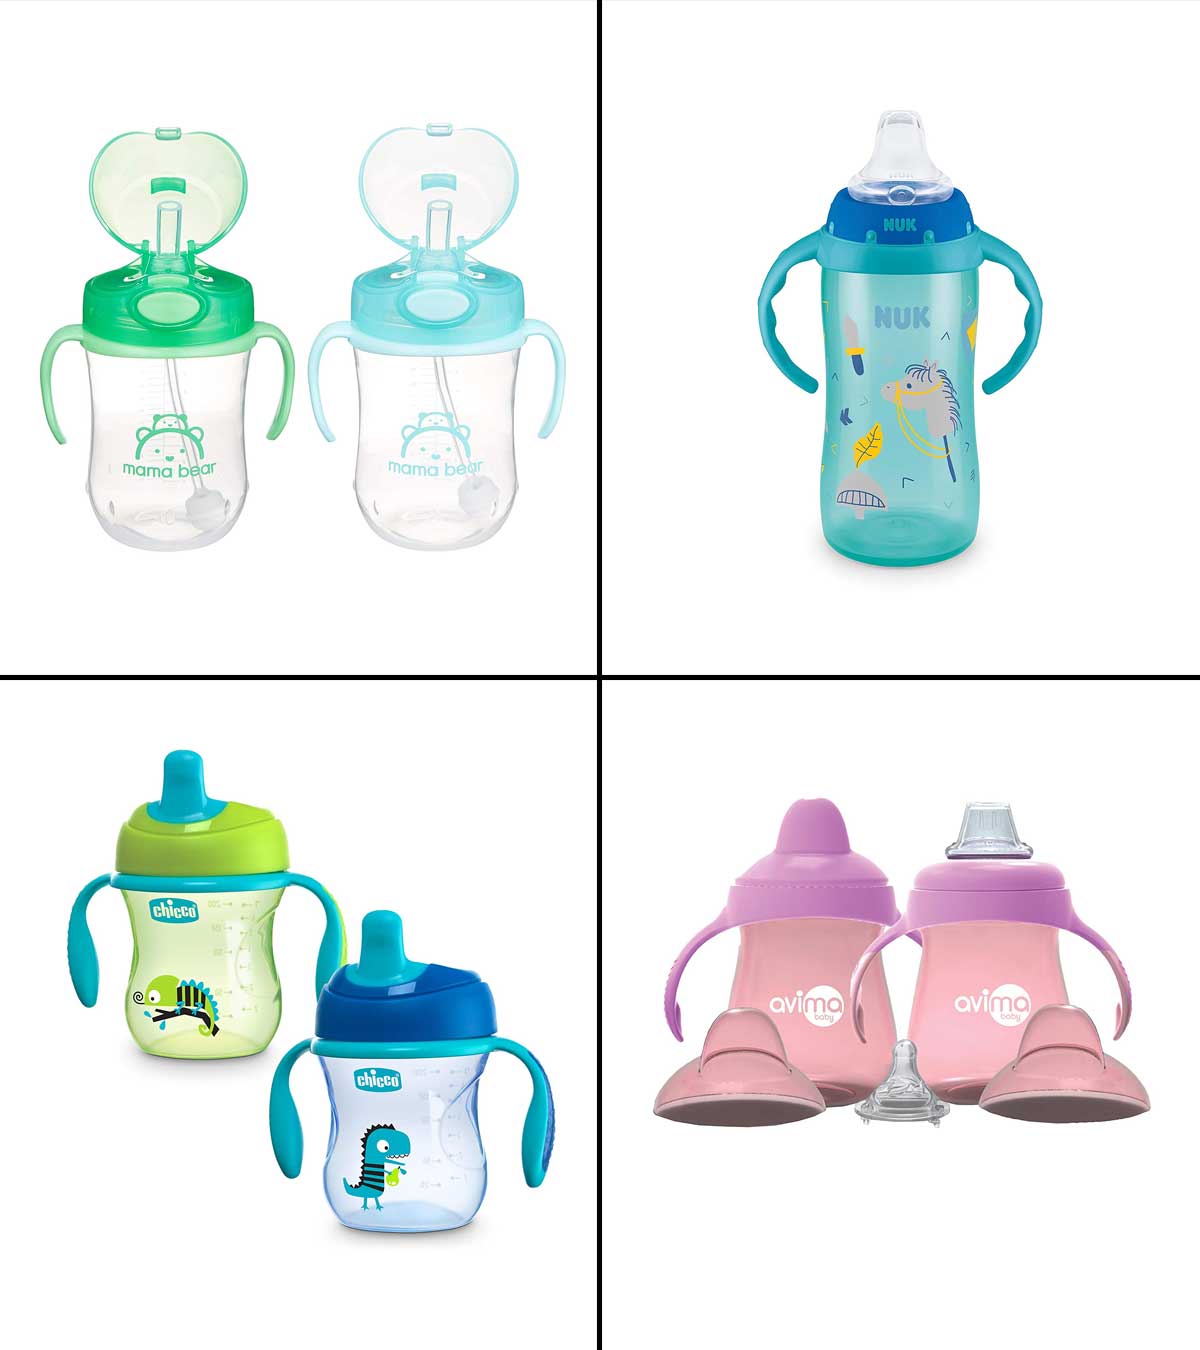 https://www.momjunction.com/wp-content/uploads/2021/08/11-Best-Sippy-Cups-For-Six-Month-Olds-In-2021.jpg